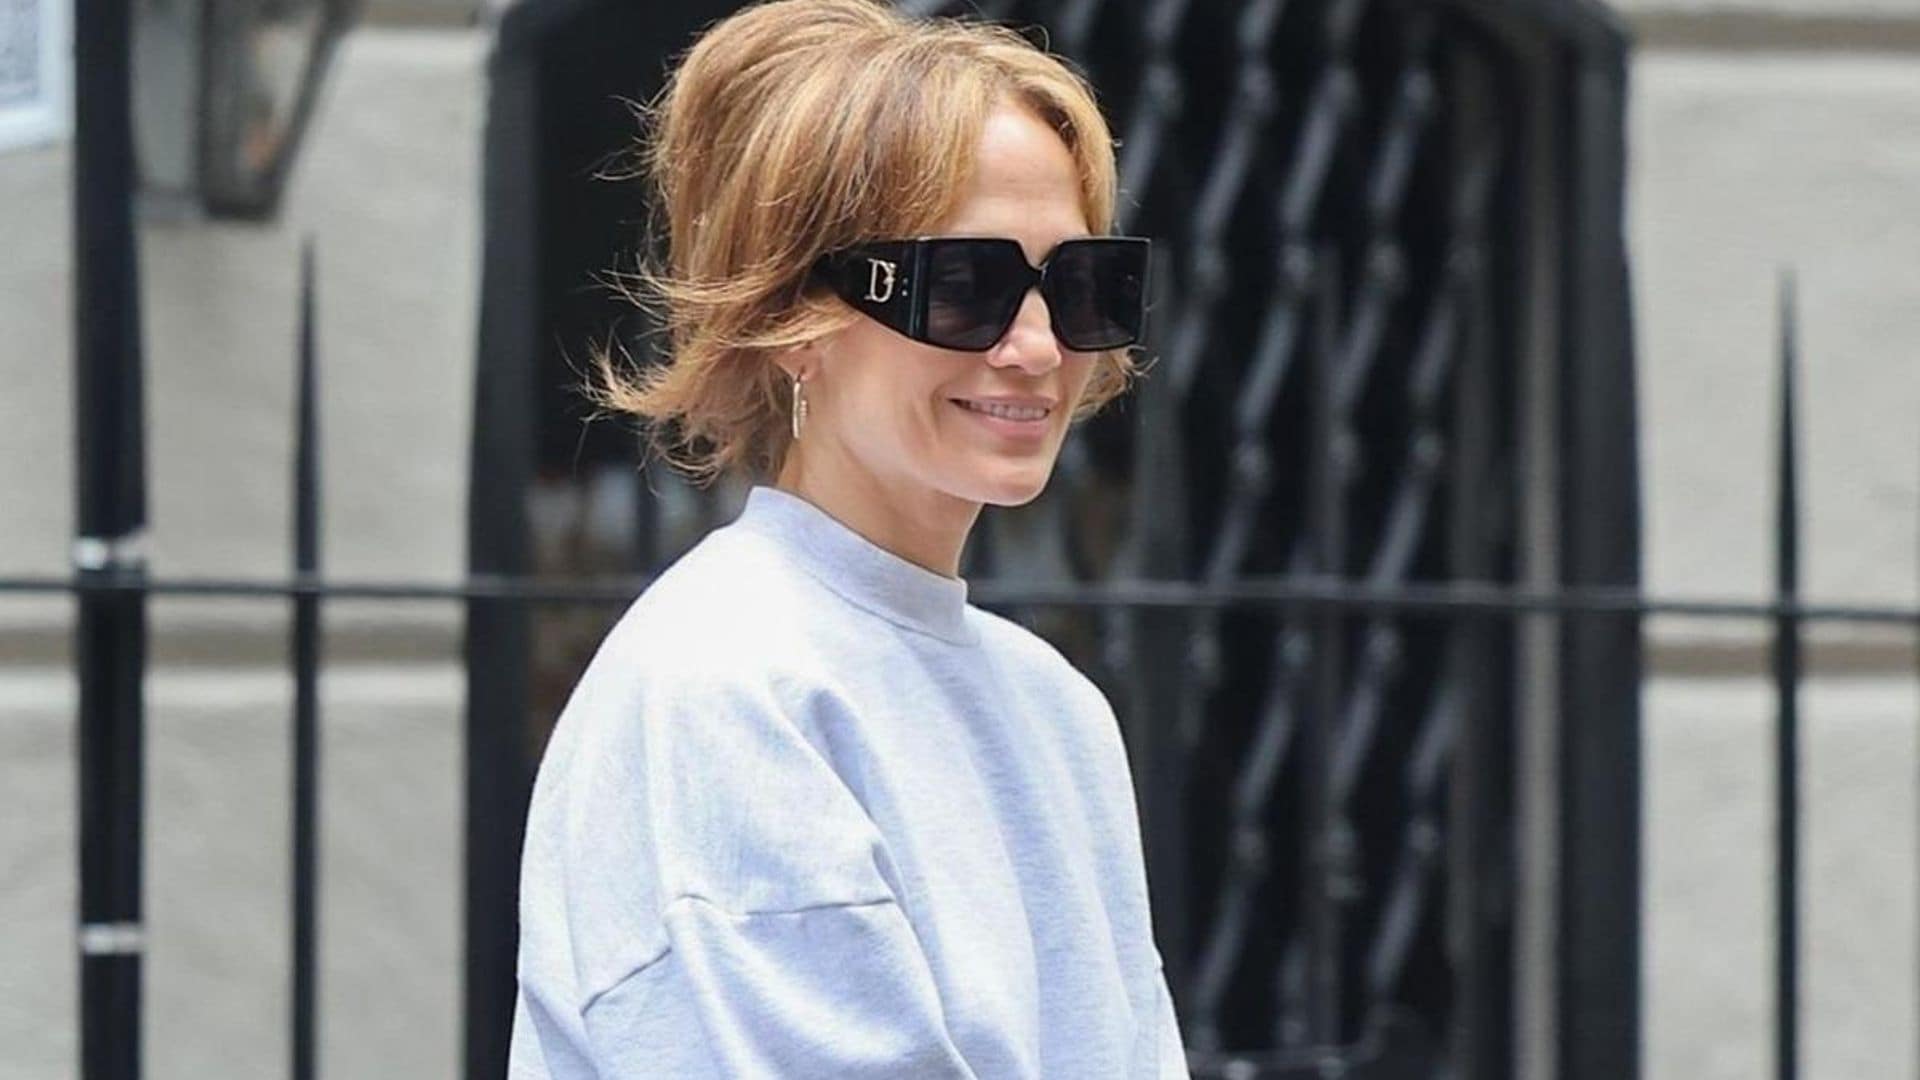 Jennifer Lopez wore the perfect make-up free outift in latest New York City outing